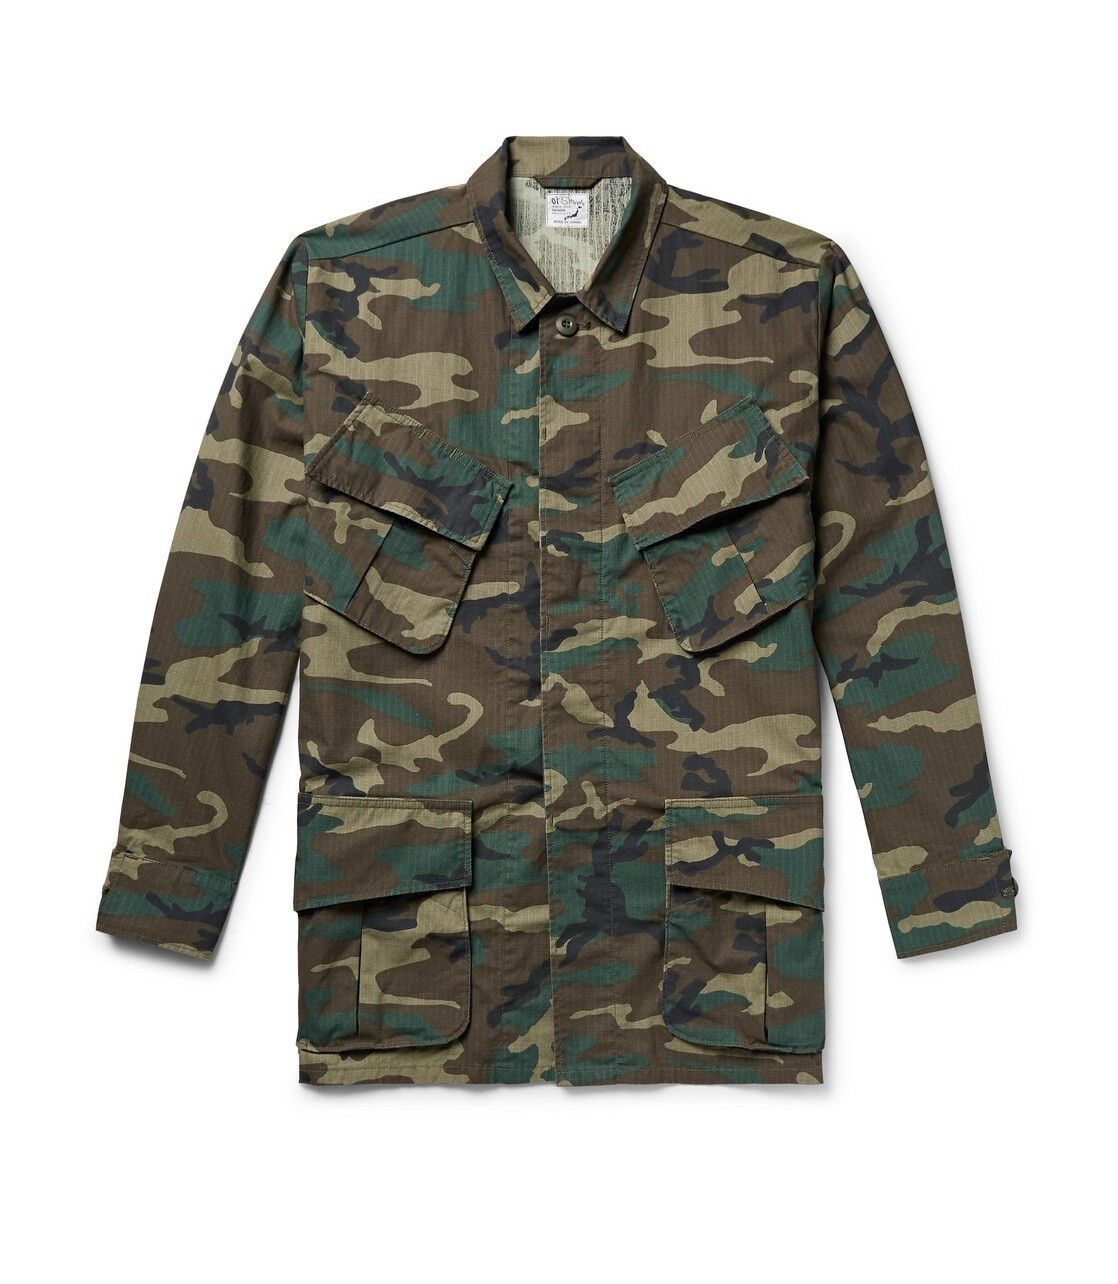 Orslow Orslow US Army Tropical Coat - Woodland Camo | Grailed